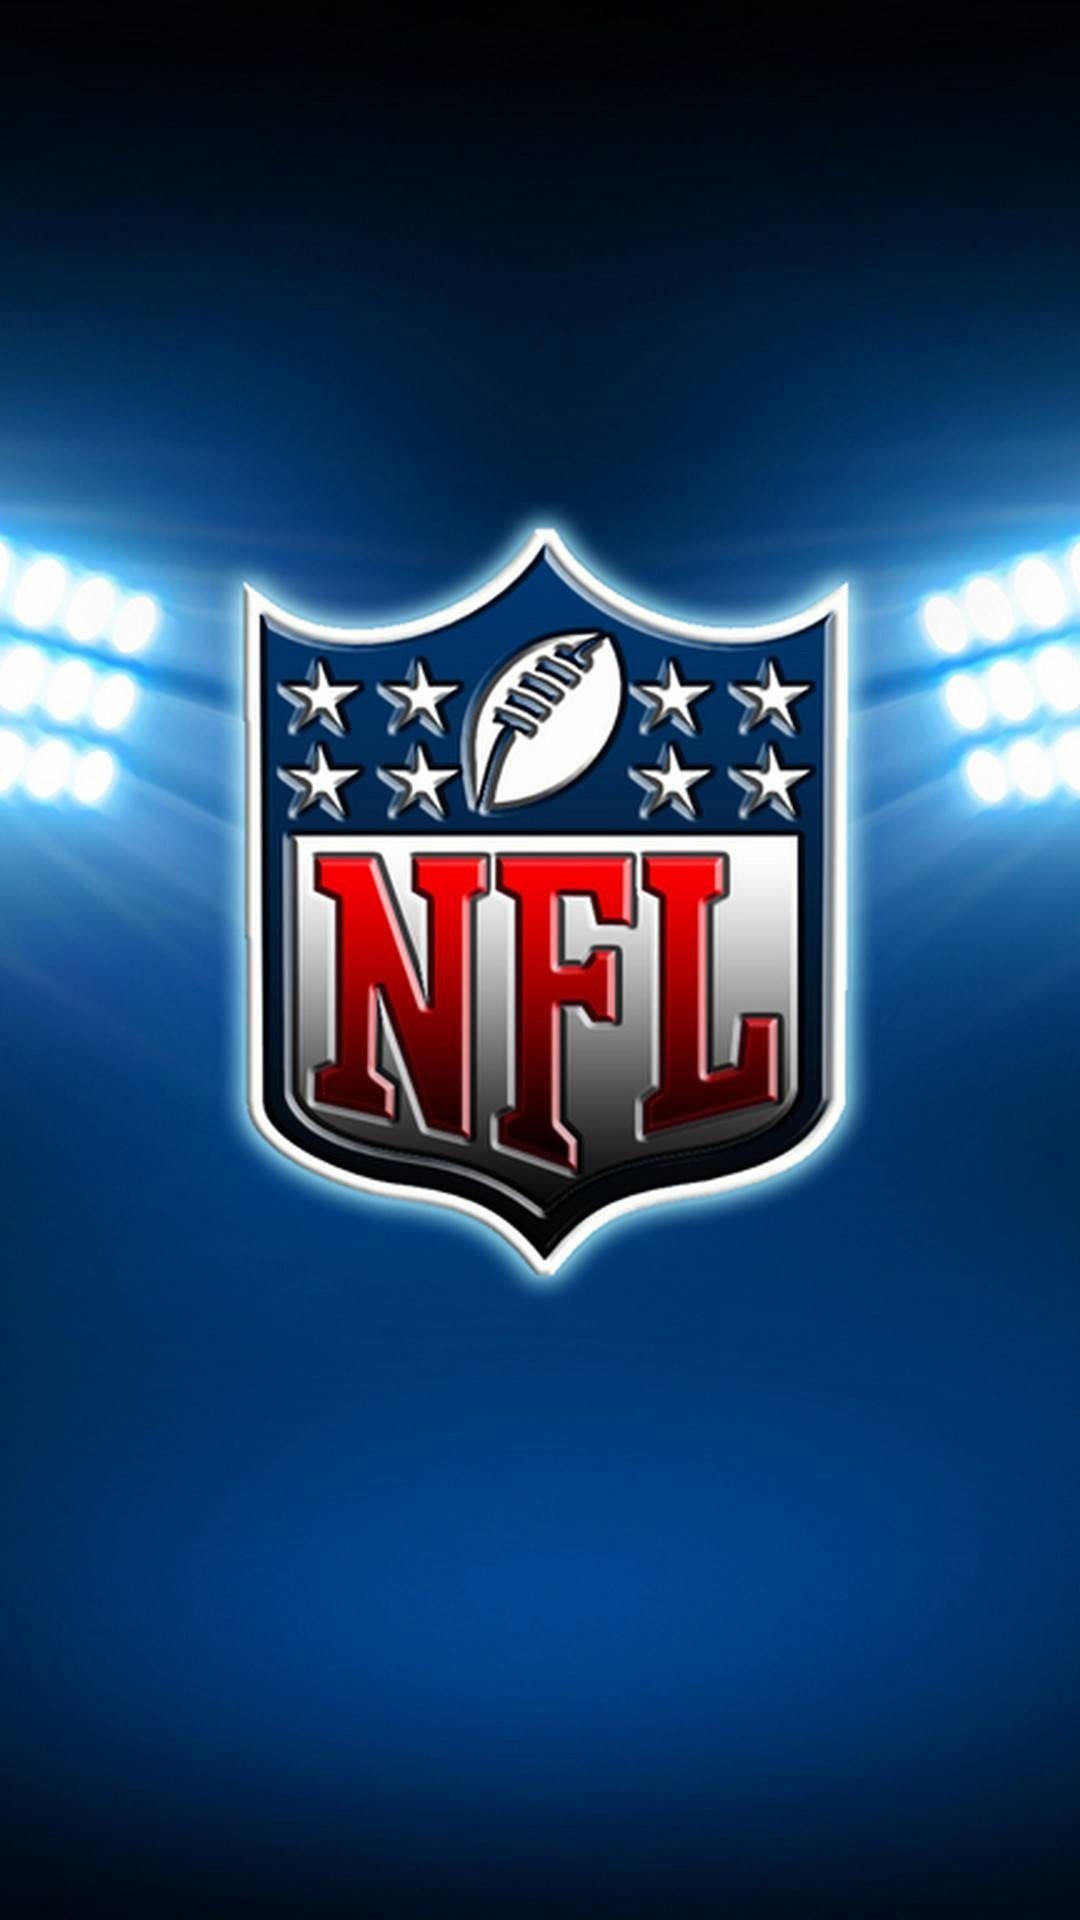 NFL Football (Every Team Represented). Set. HD. Mobile